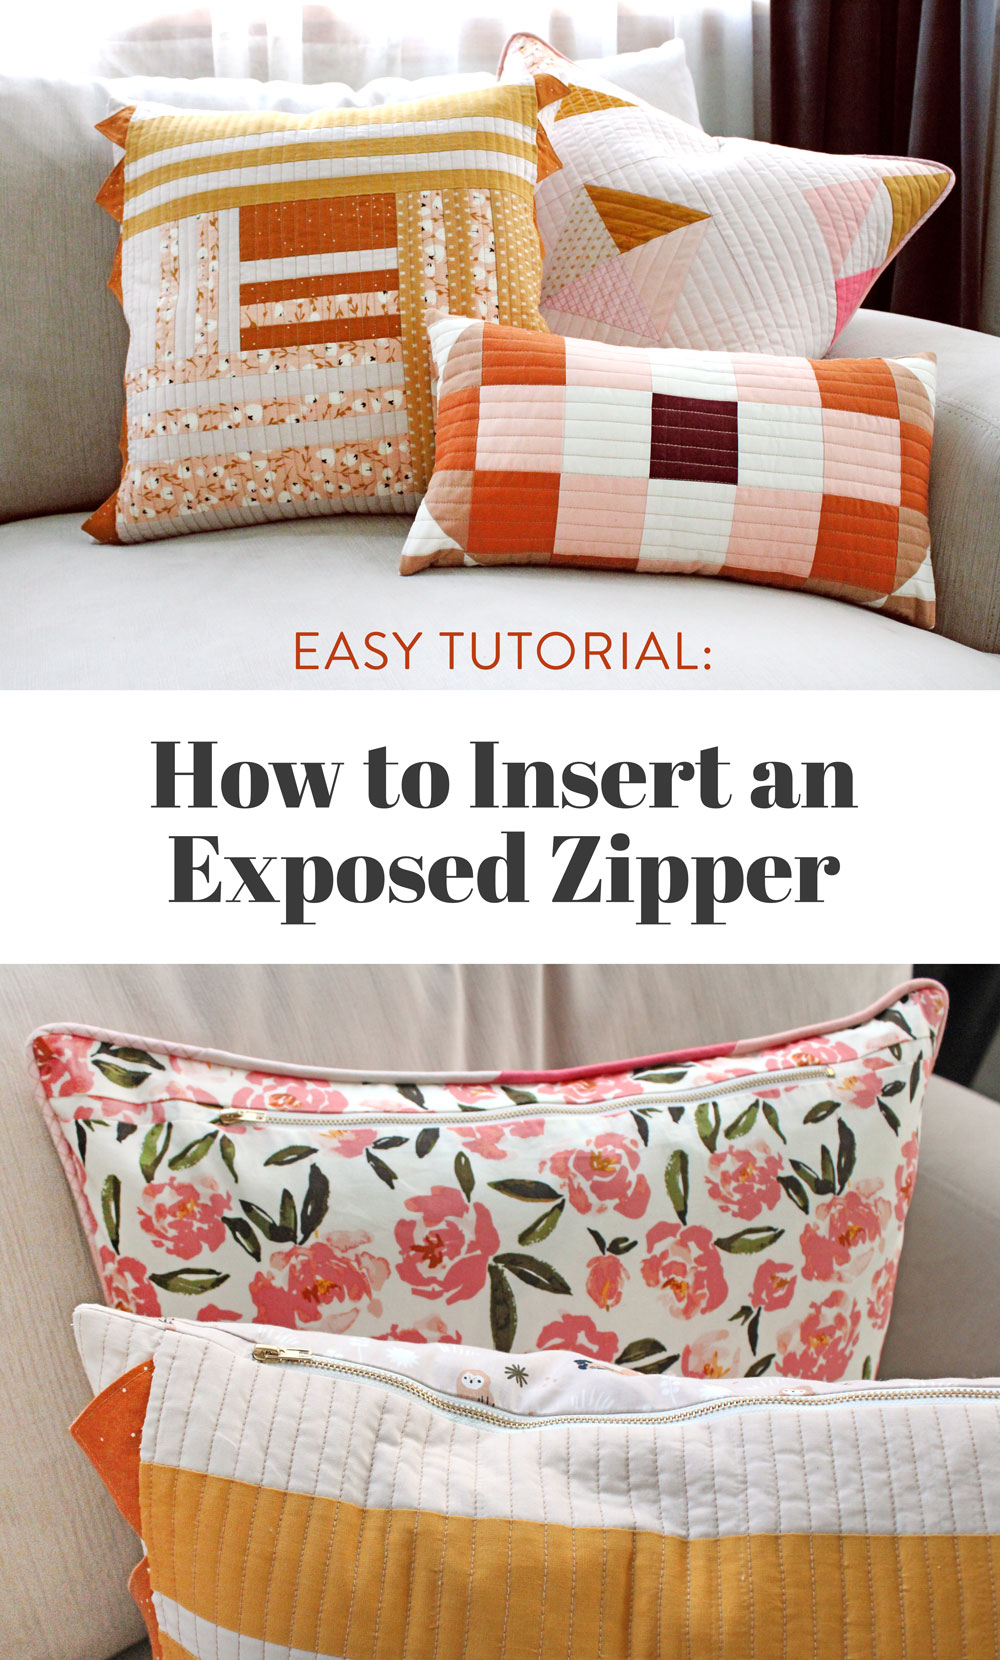 How to insert an exposed zipper into a pillow. Use this beginner tutorial to see how simple it is to sew a zipper in a quilted pillow! suzyquilts.com #zippertutorial